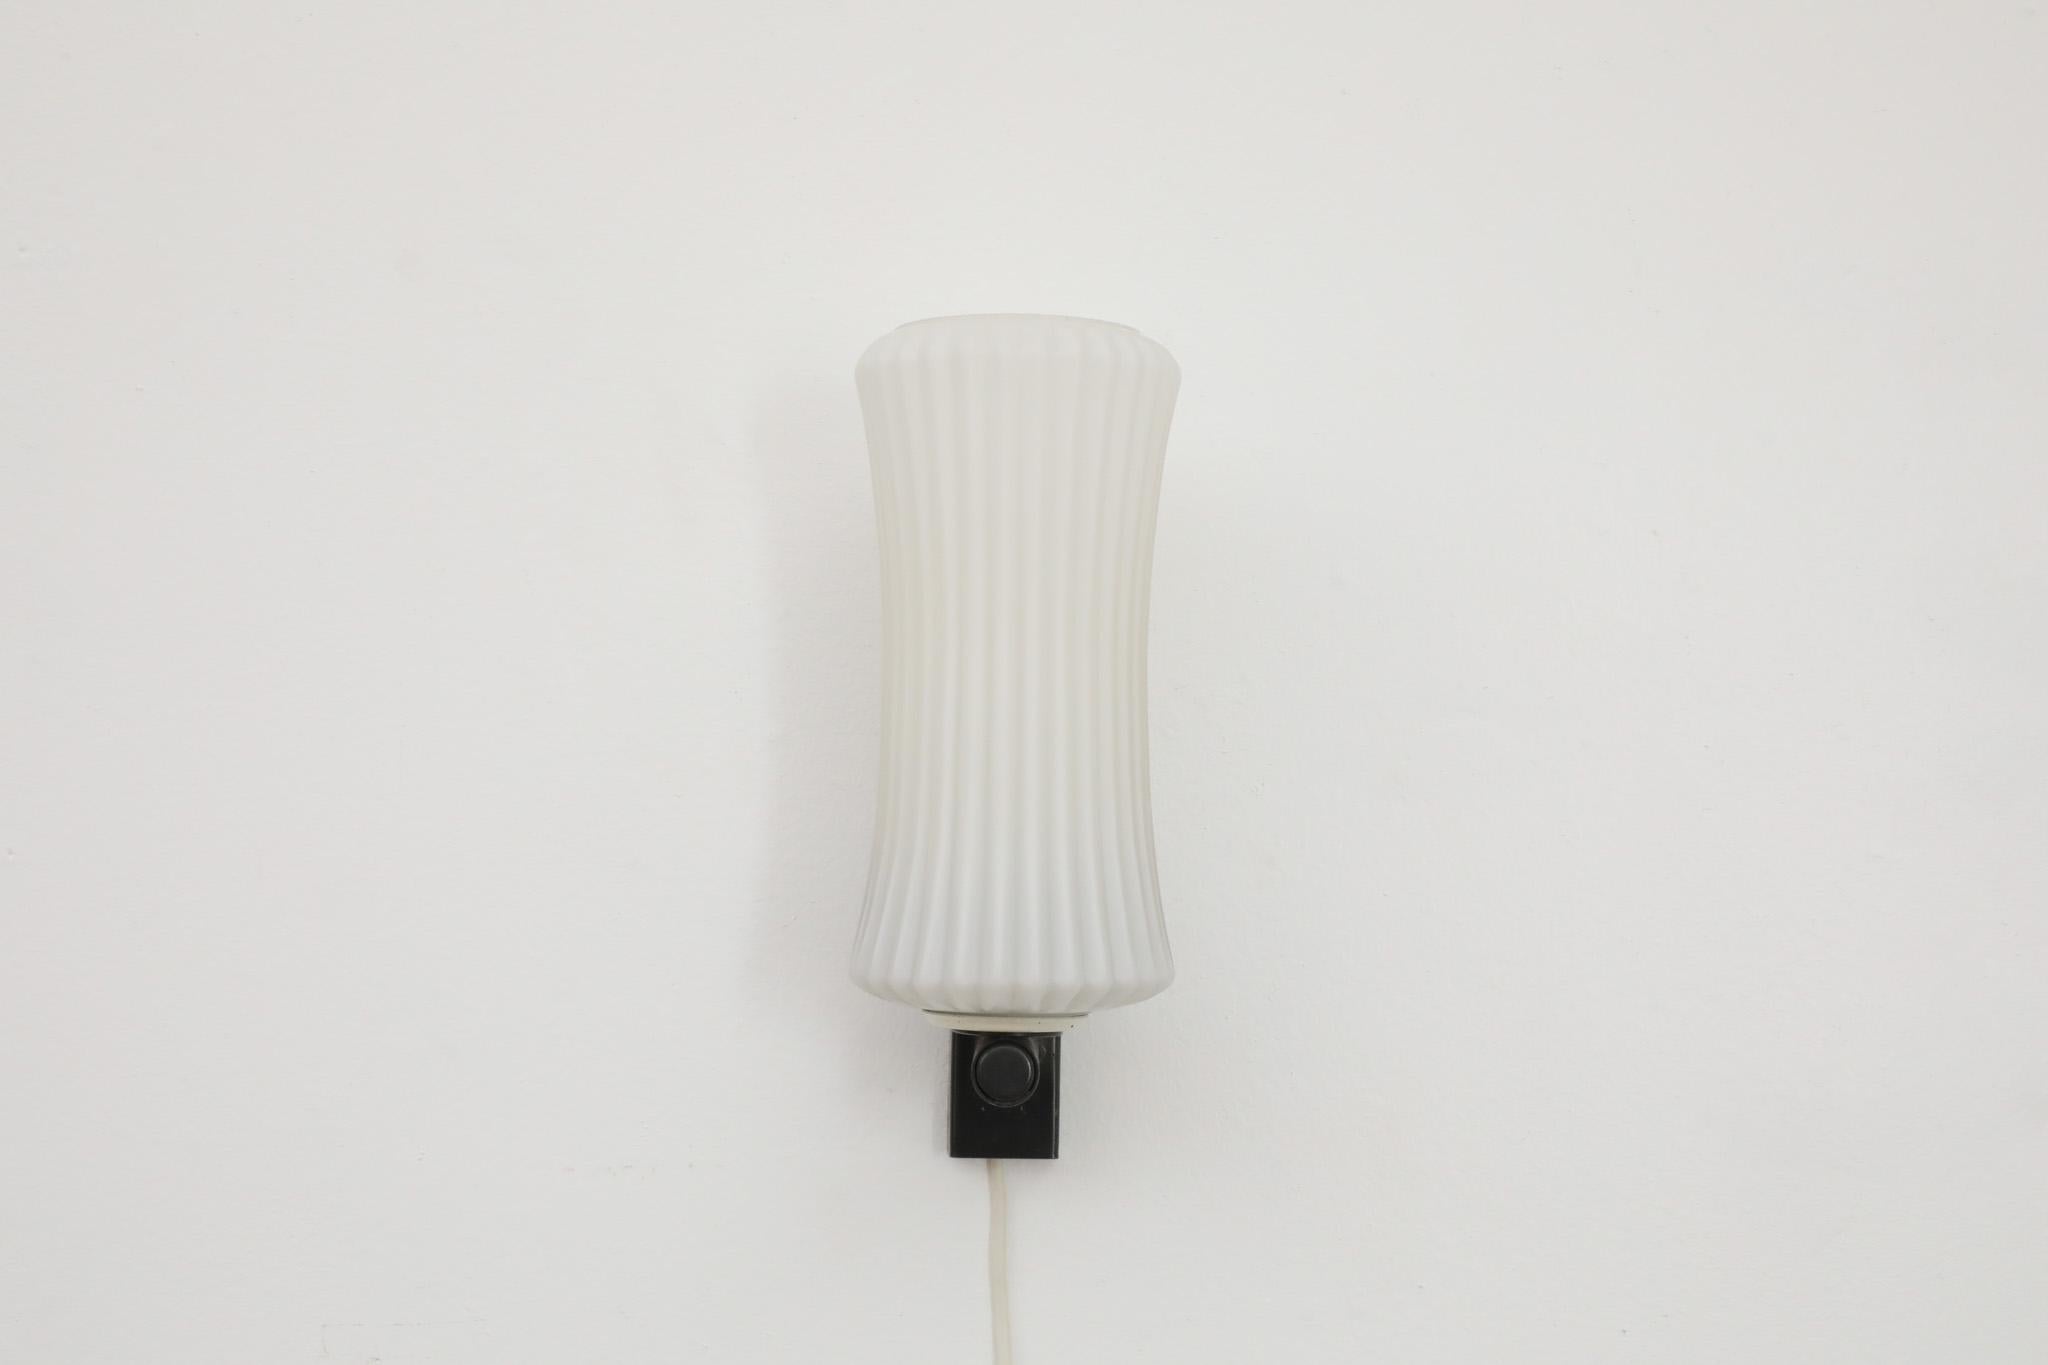 Wall mounted, Mid-Century milk glass sconce by pioneering Dutch manufacturer Philips. Has a black enameled metal base with corseted milk glass shade. The light is in original condition with some visible wear consistent with age and use. Similar pair